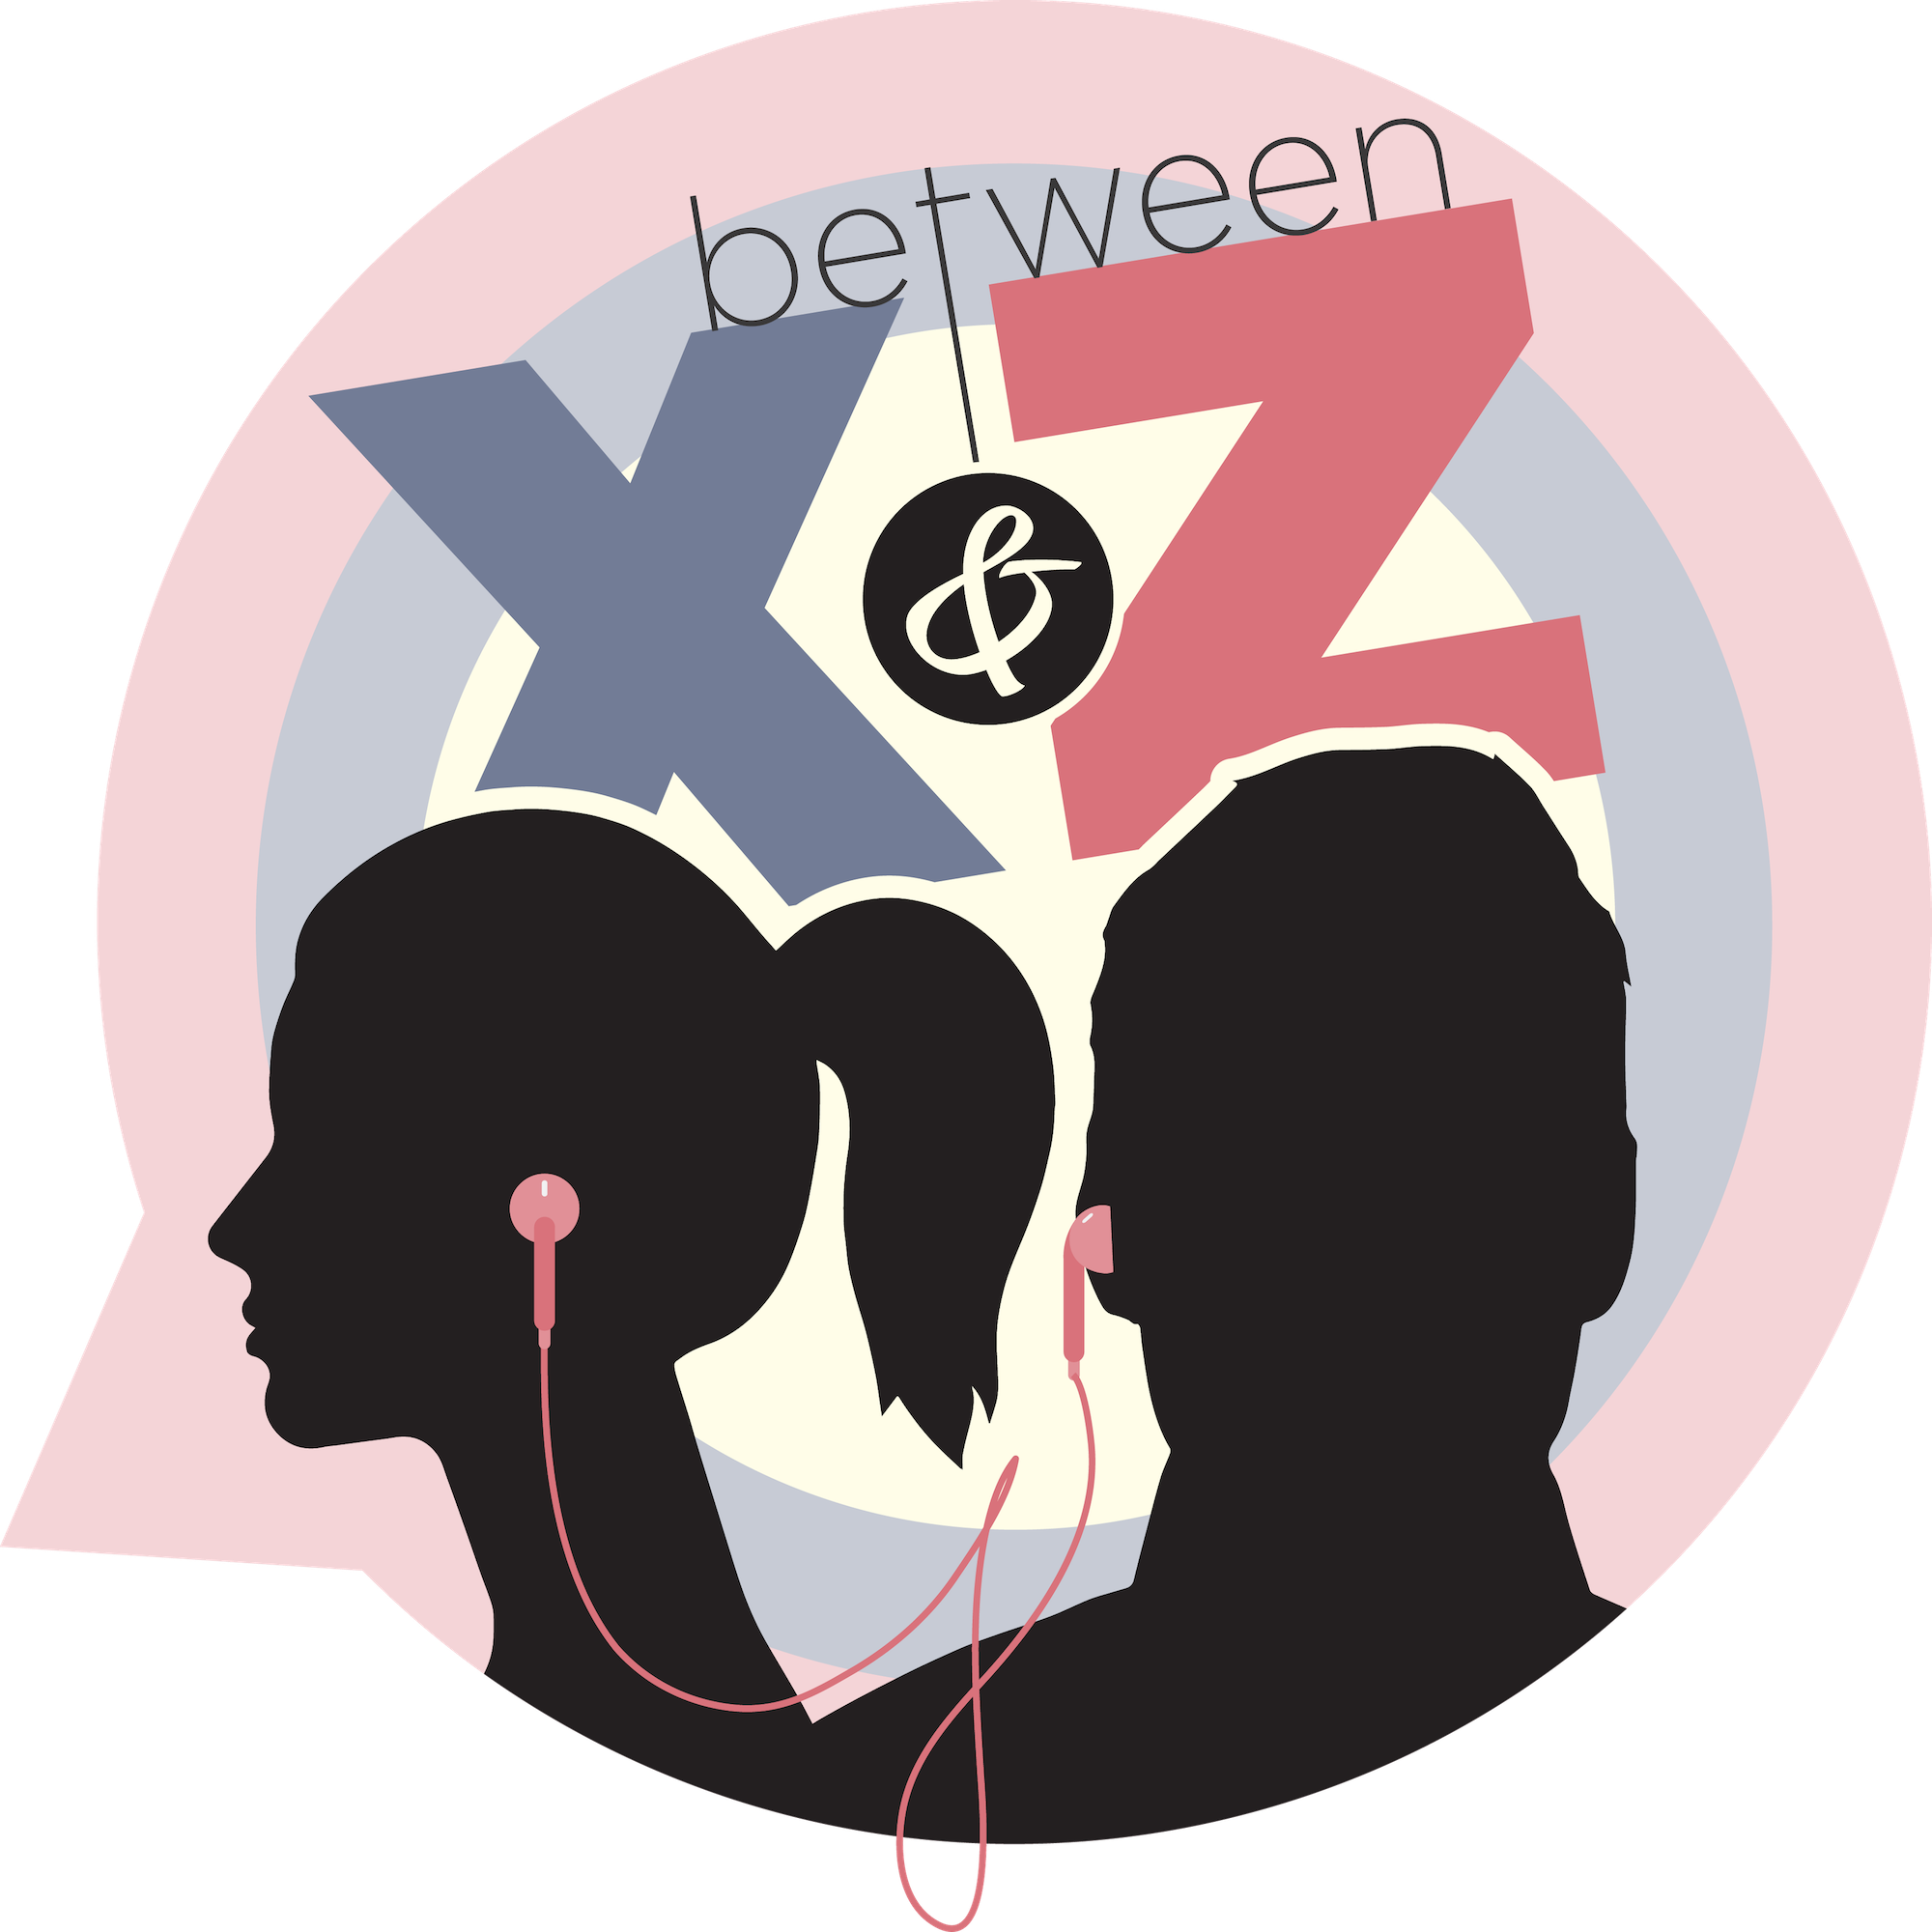 Artwork for Between X and Z